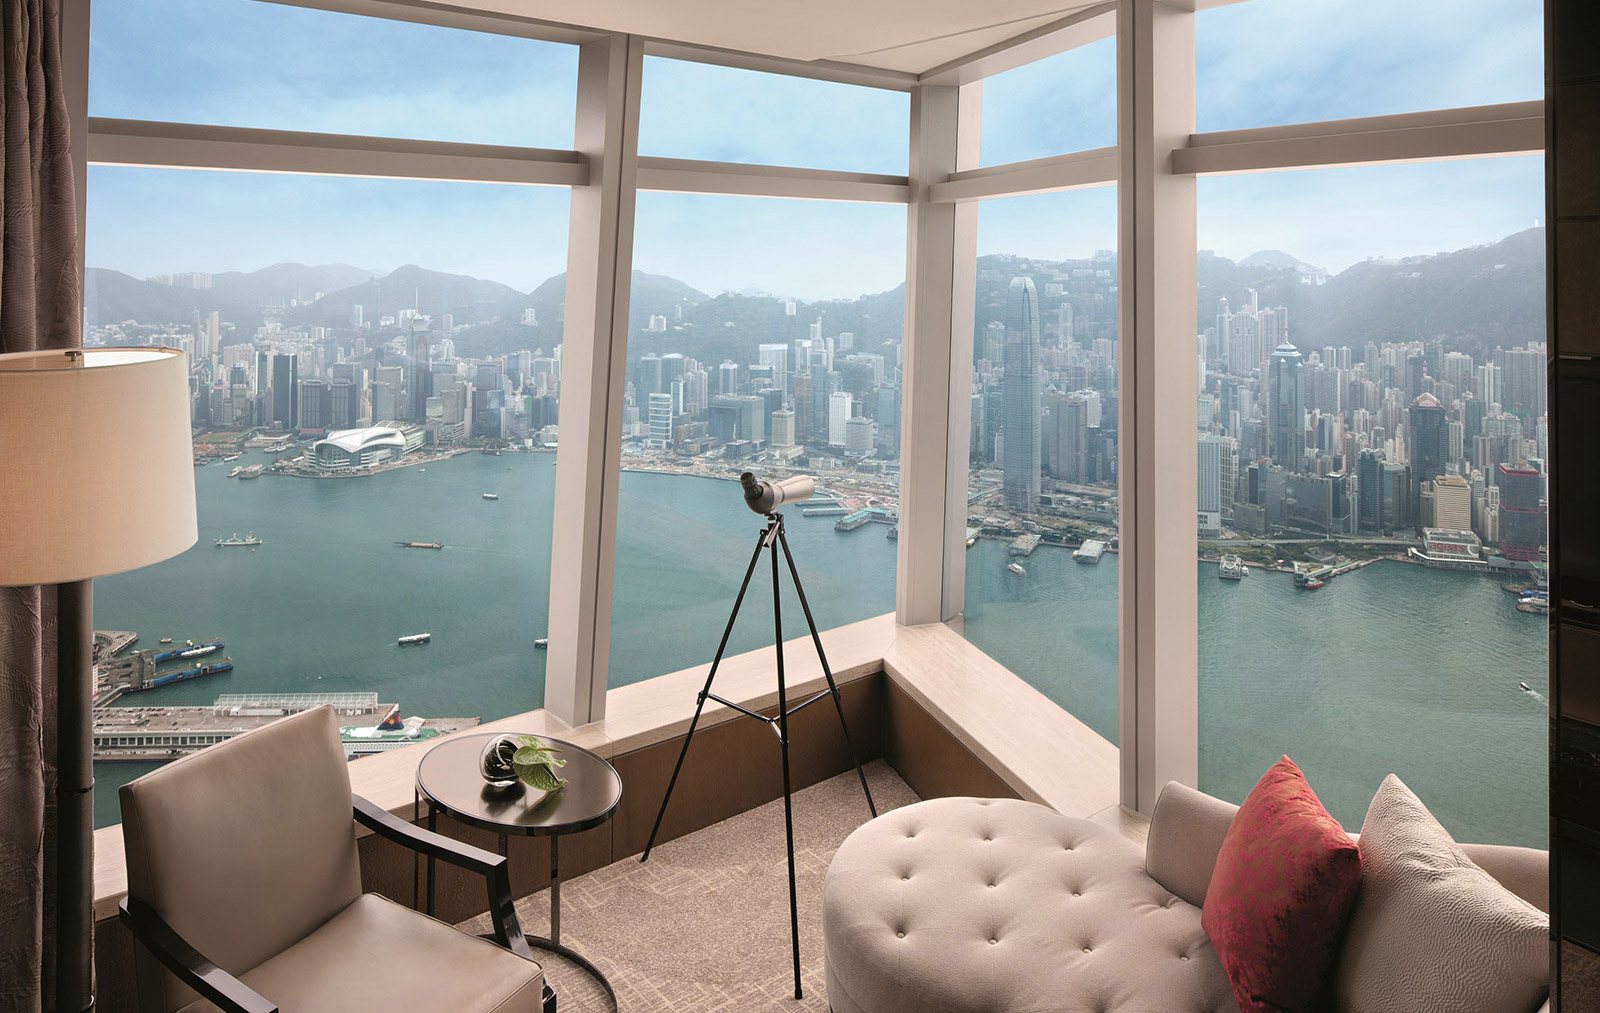 View from the Ritz Carlton Deluxe Victoria Harbour Suite in Kowloon, Hong Kong